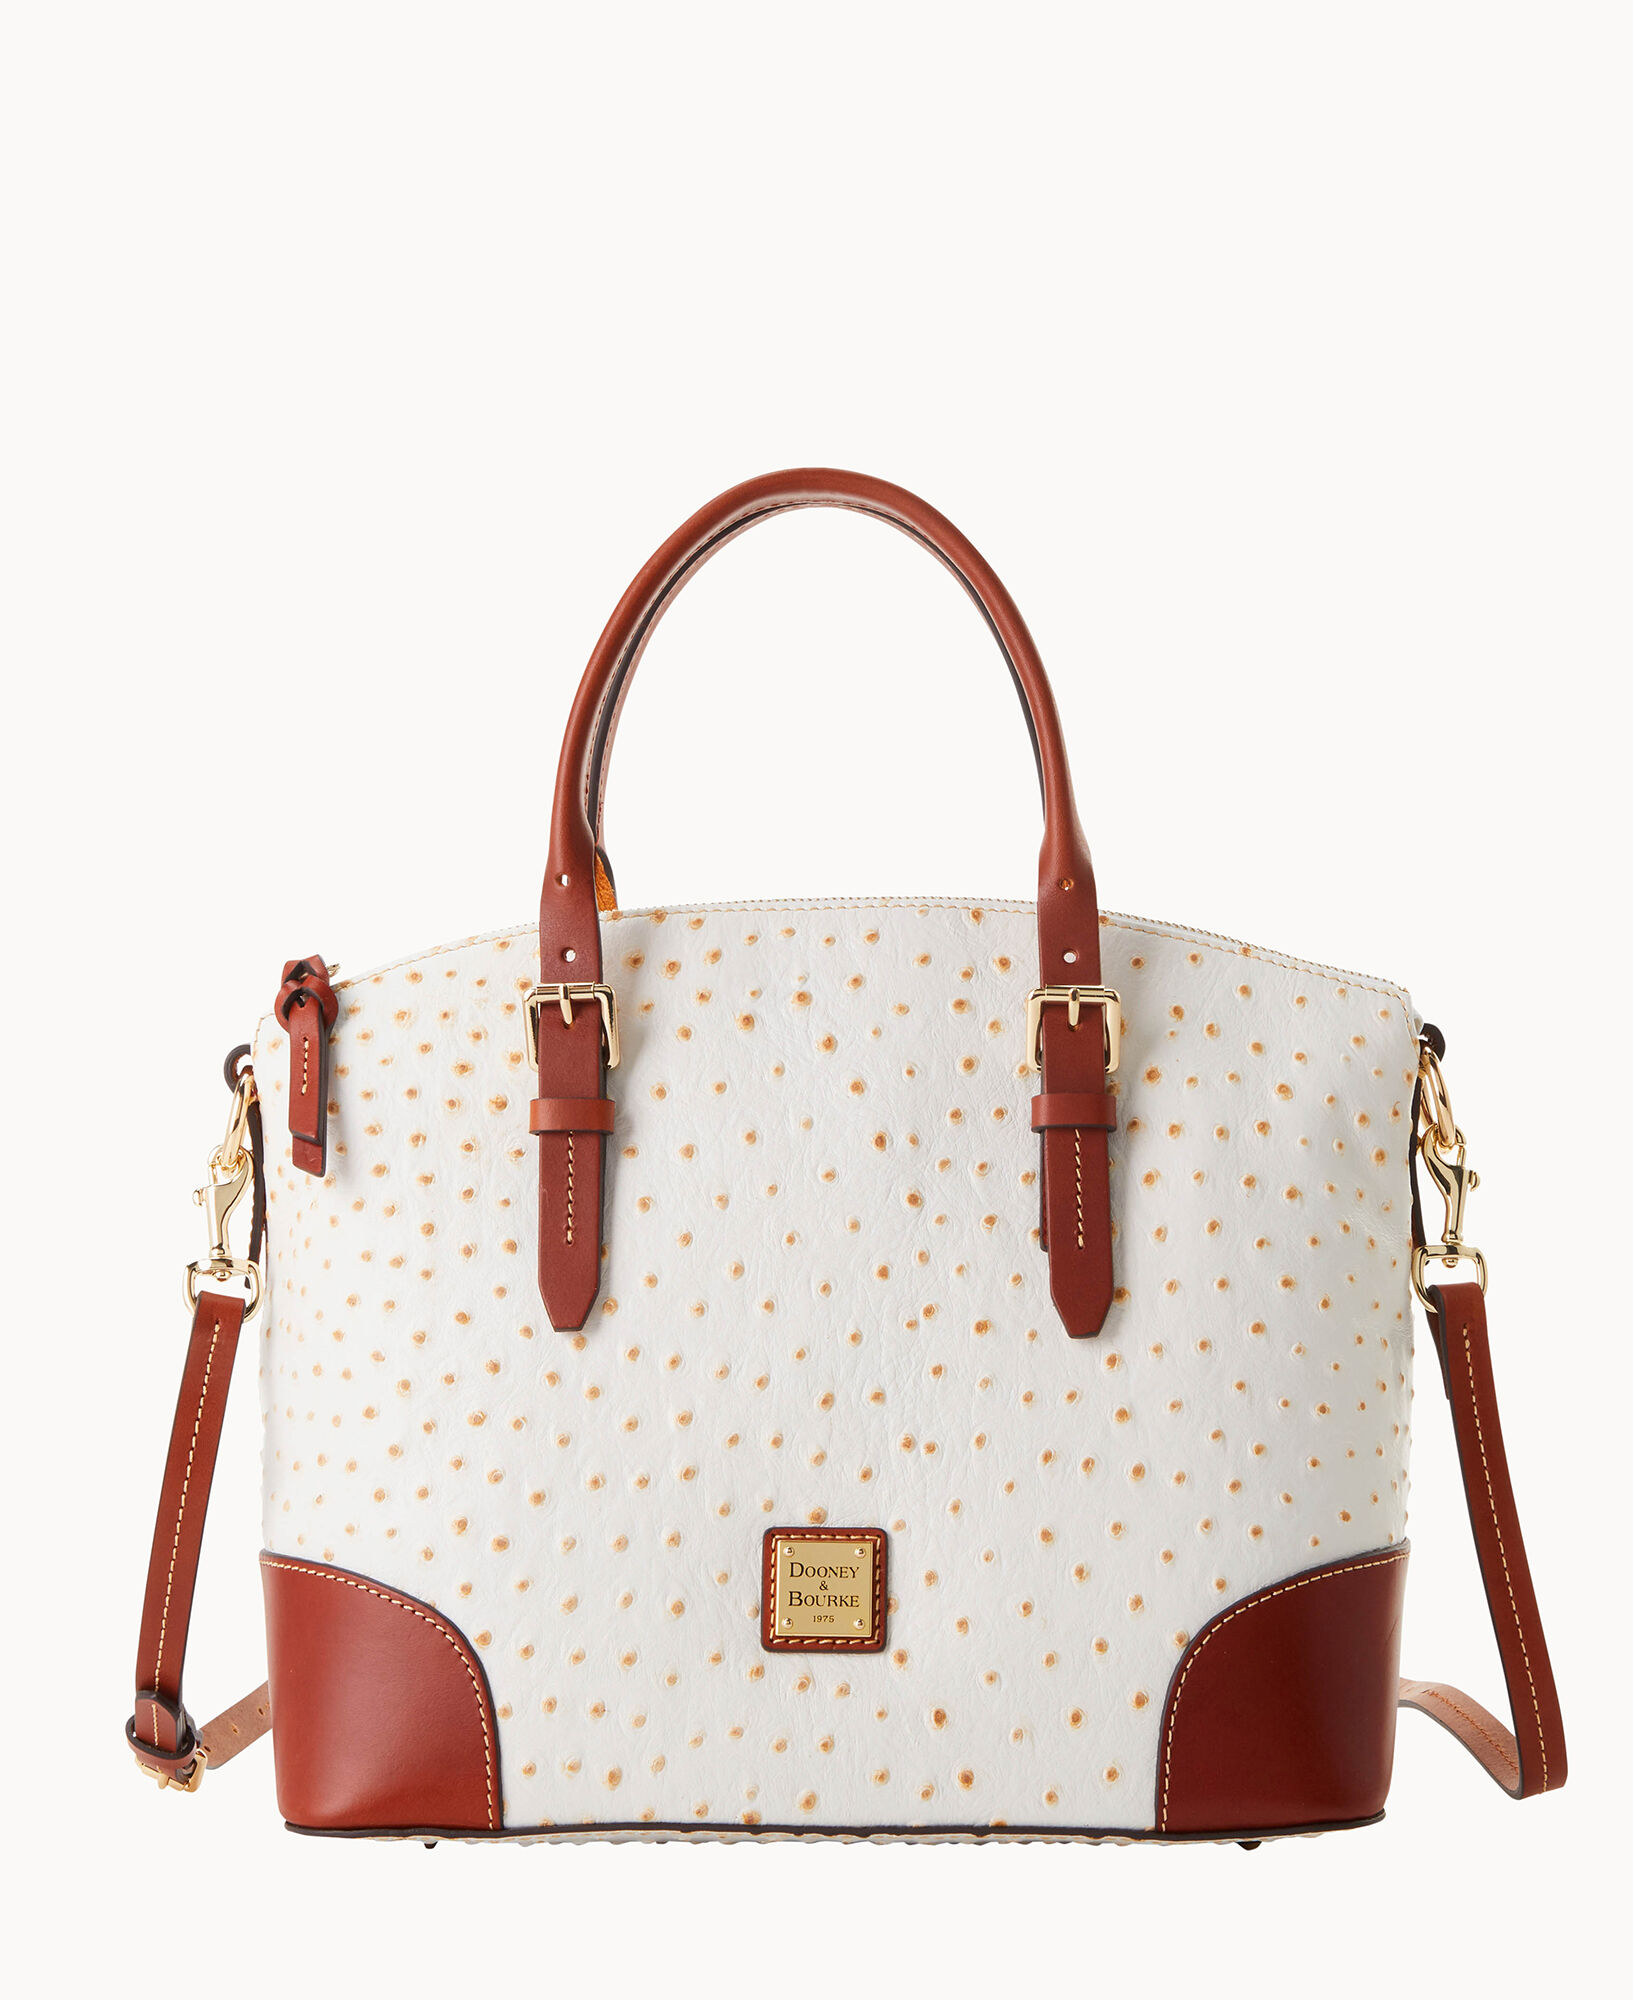 Catherine Satchel Ostrich Bag for an Elegant Outfit